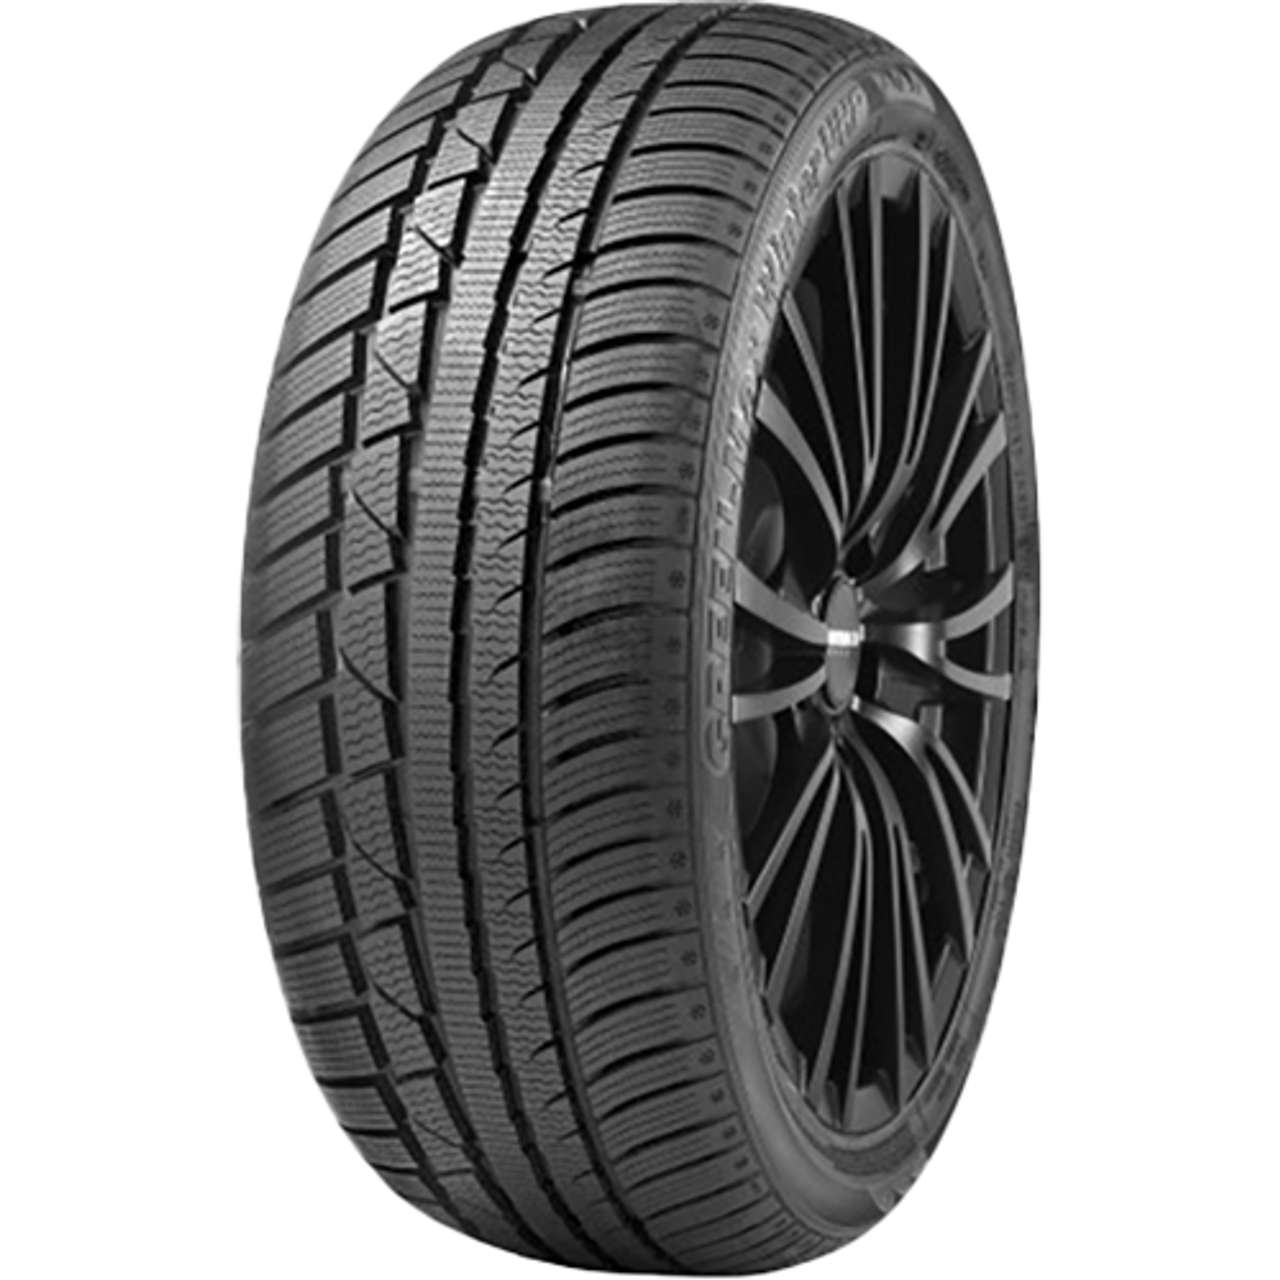 LINGLONG GREEN-MAX WINTER UHP 245/40R18 97V MFS BSW XL